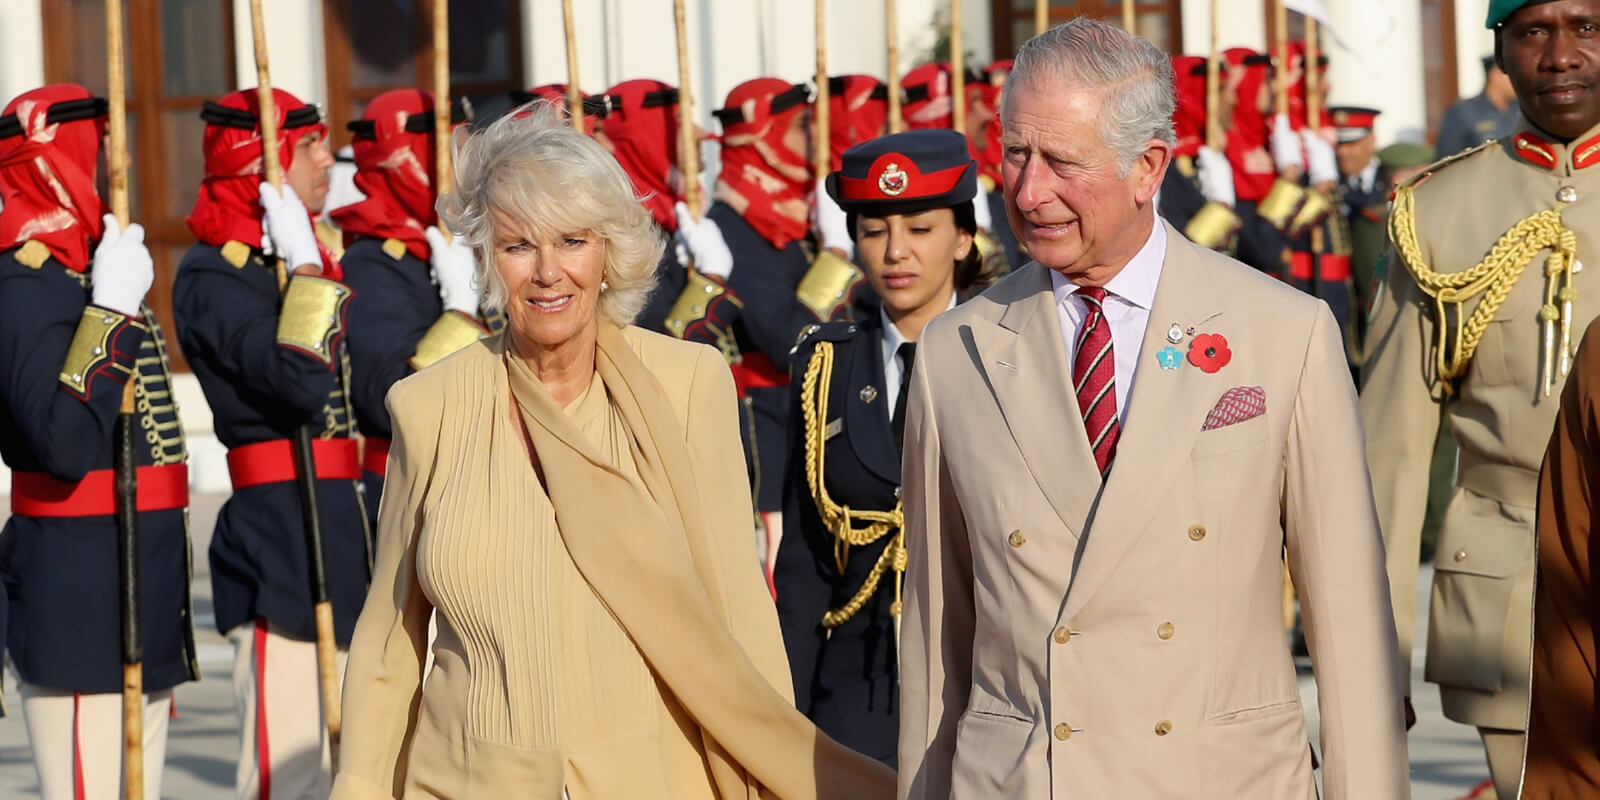 Camilla Parker Bowles and King Charles III head to the Royal plane on day 4 of a Royal tour of Bahrain on November 11, 2016 in Manama, Bahrain.